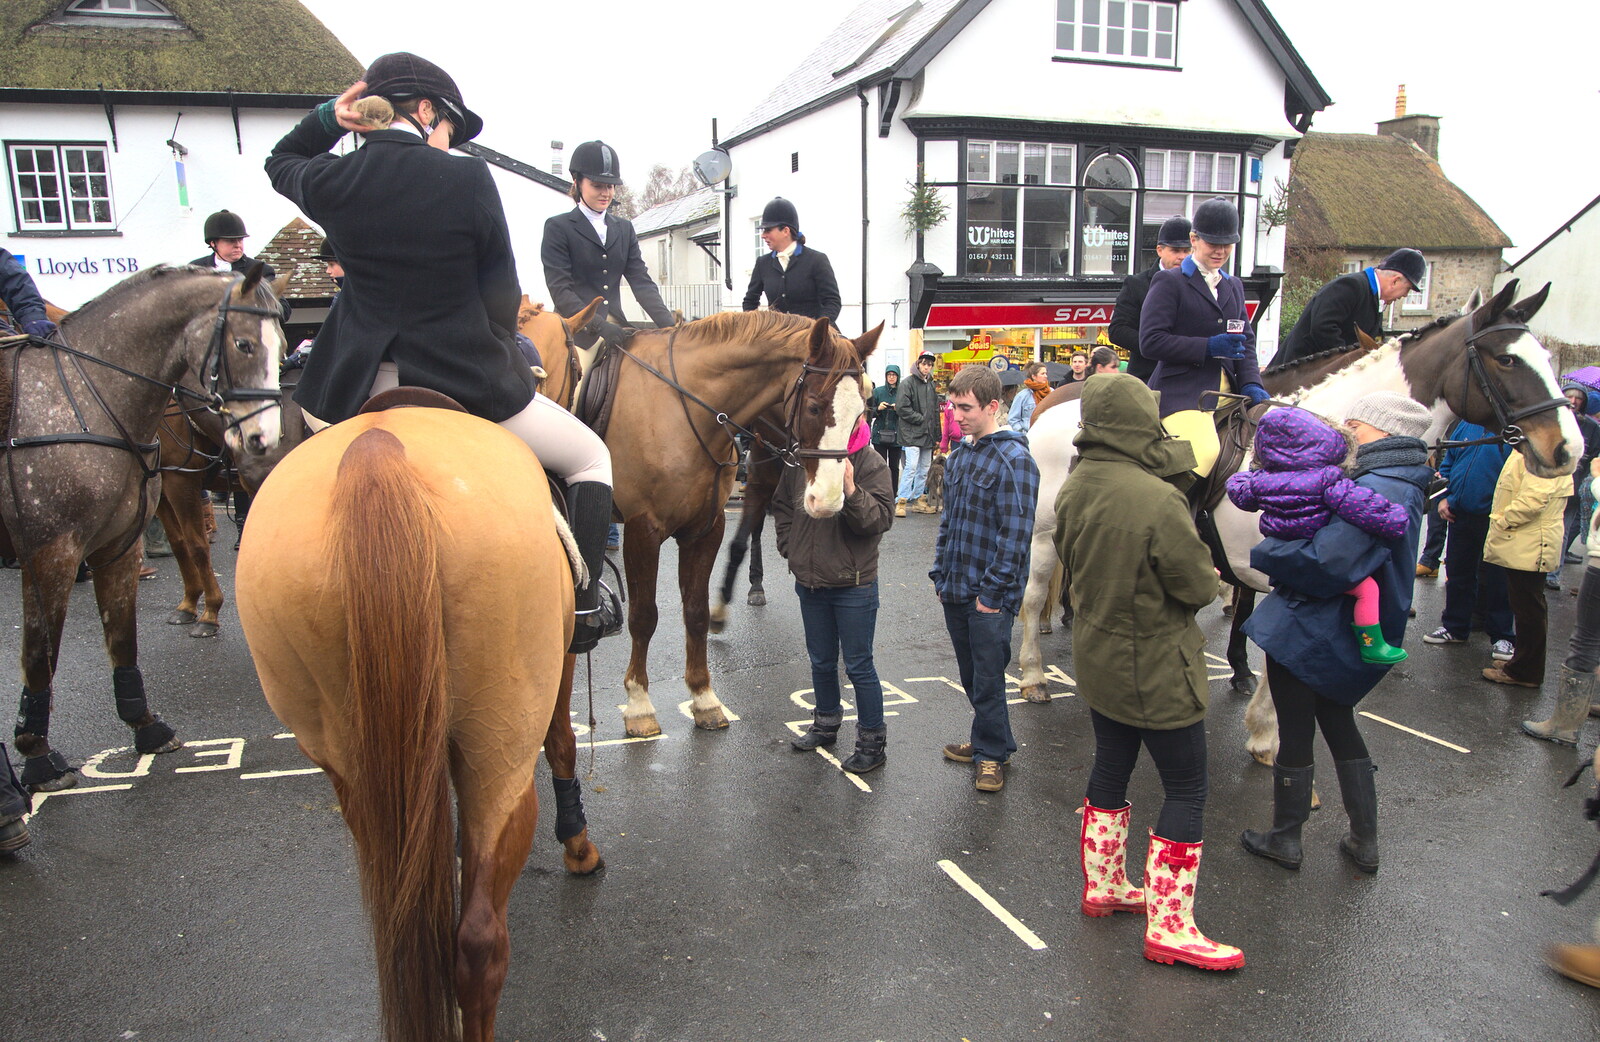 Hanging around outside the Spar from The Boxing Day Hunt, Chagford, Devon - 26th December 2012